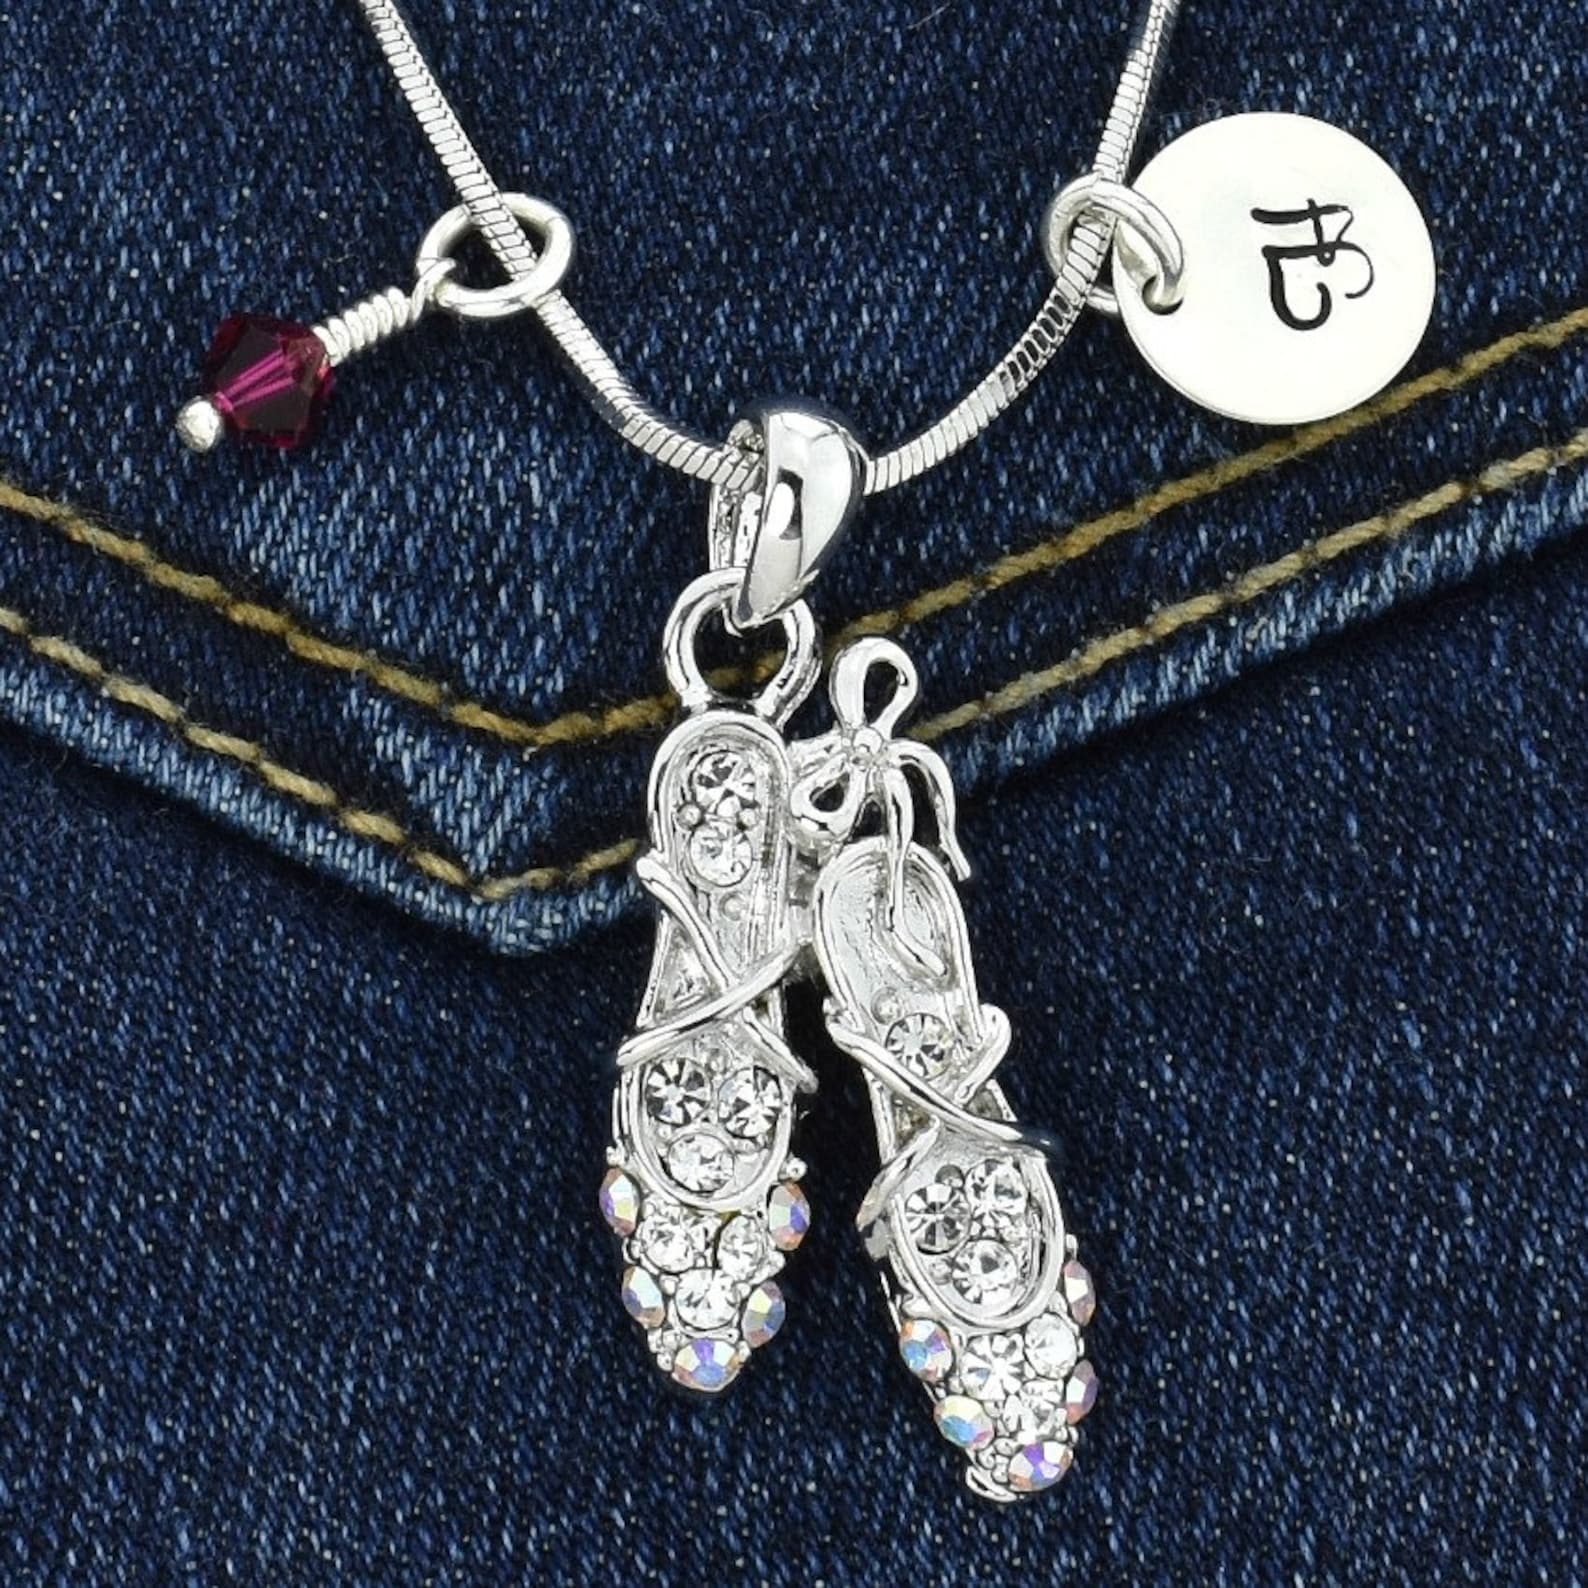 swarovski crystal ballet shoes personalized necklace pendant initial letter and birthstone charm chain custom gift jewelry